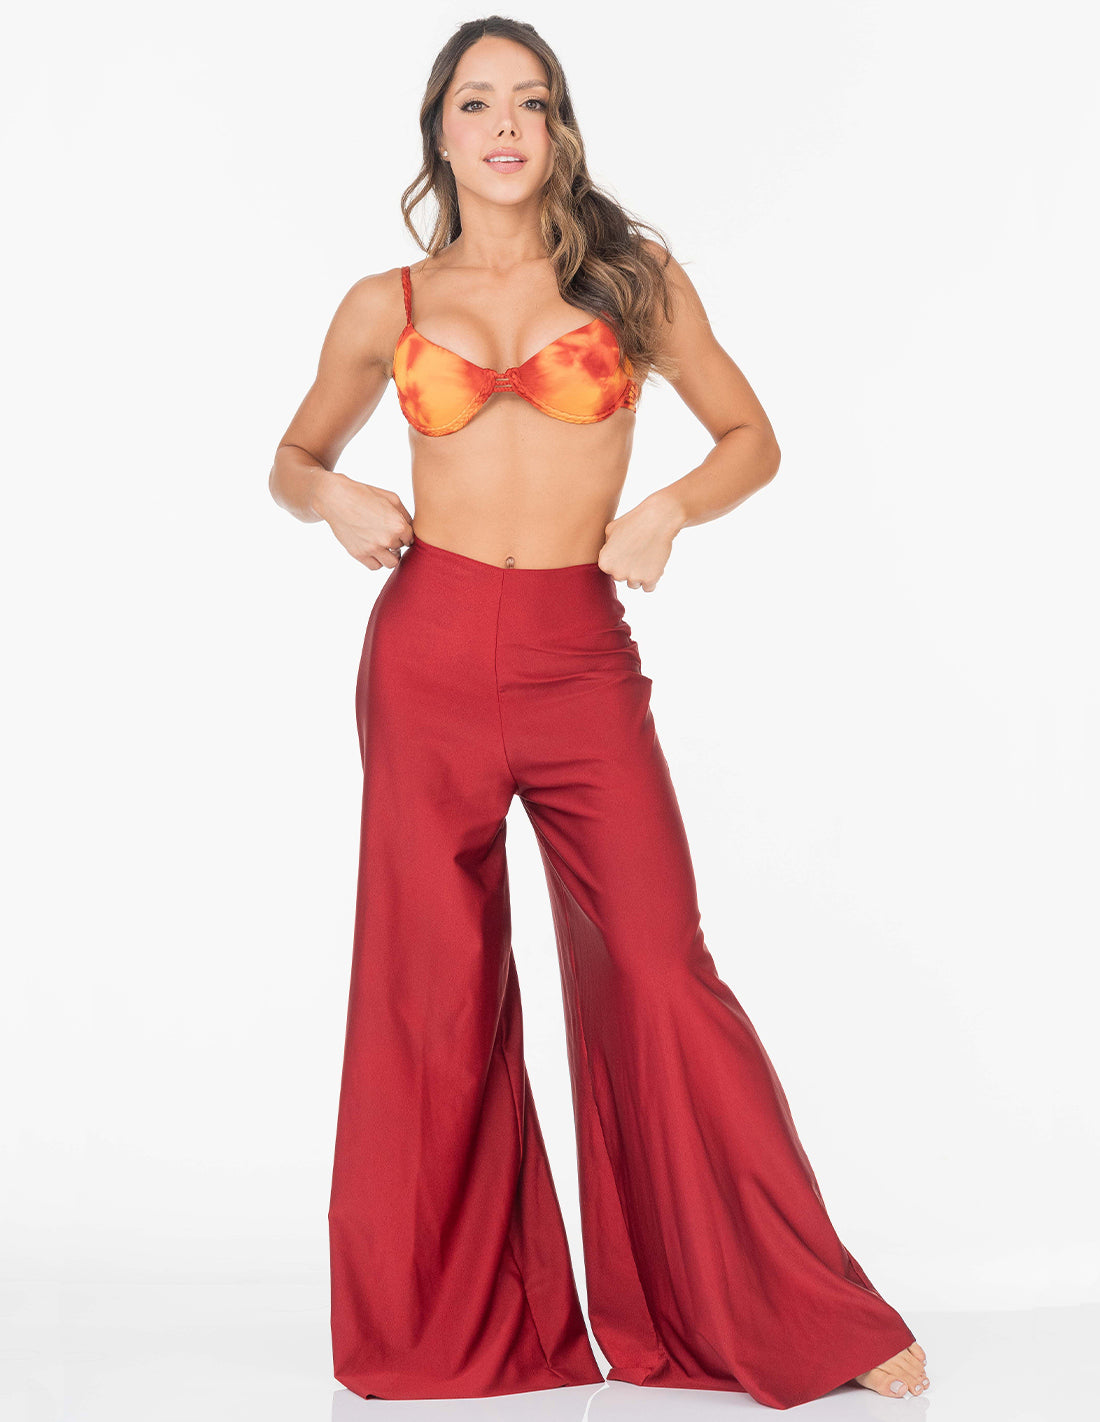 Candelaria Pants Wine. Hand-Dyed Pants With Hand Woven Macramé In Wine. Entreaguas